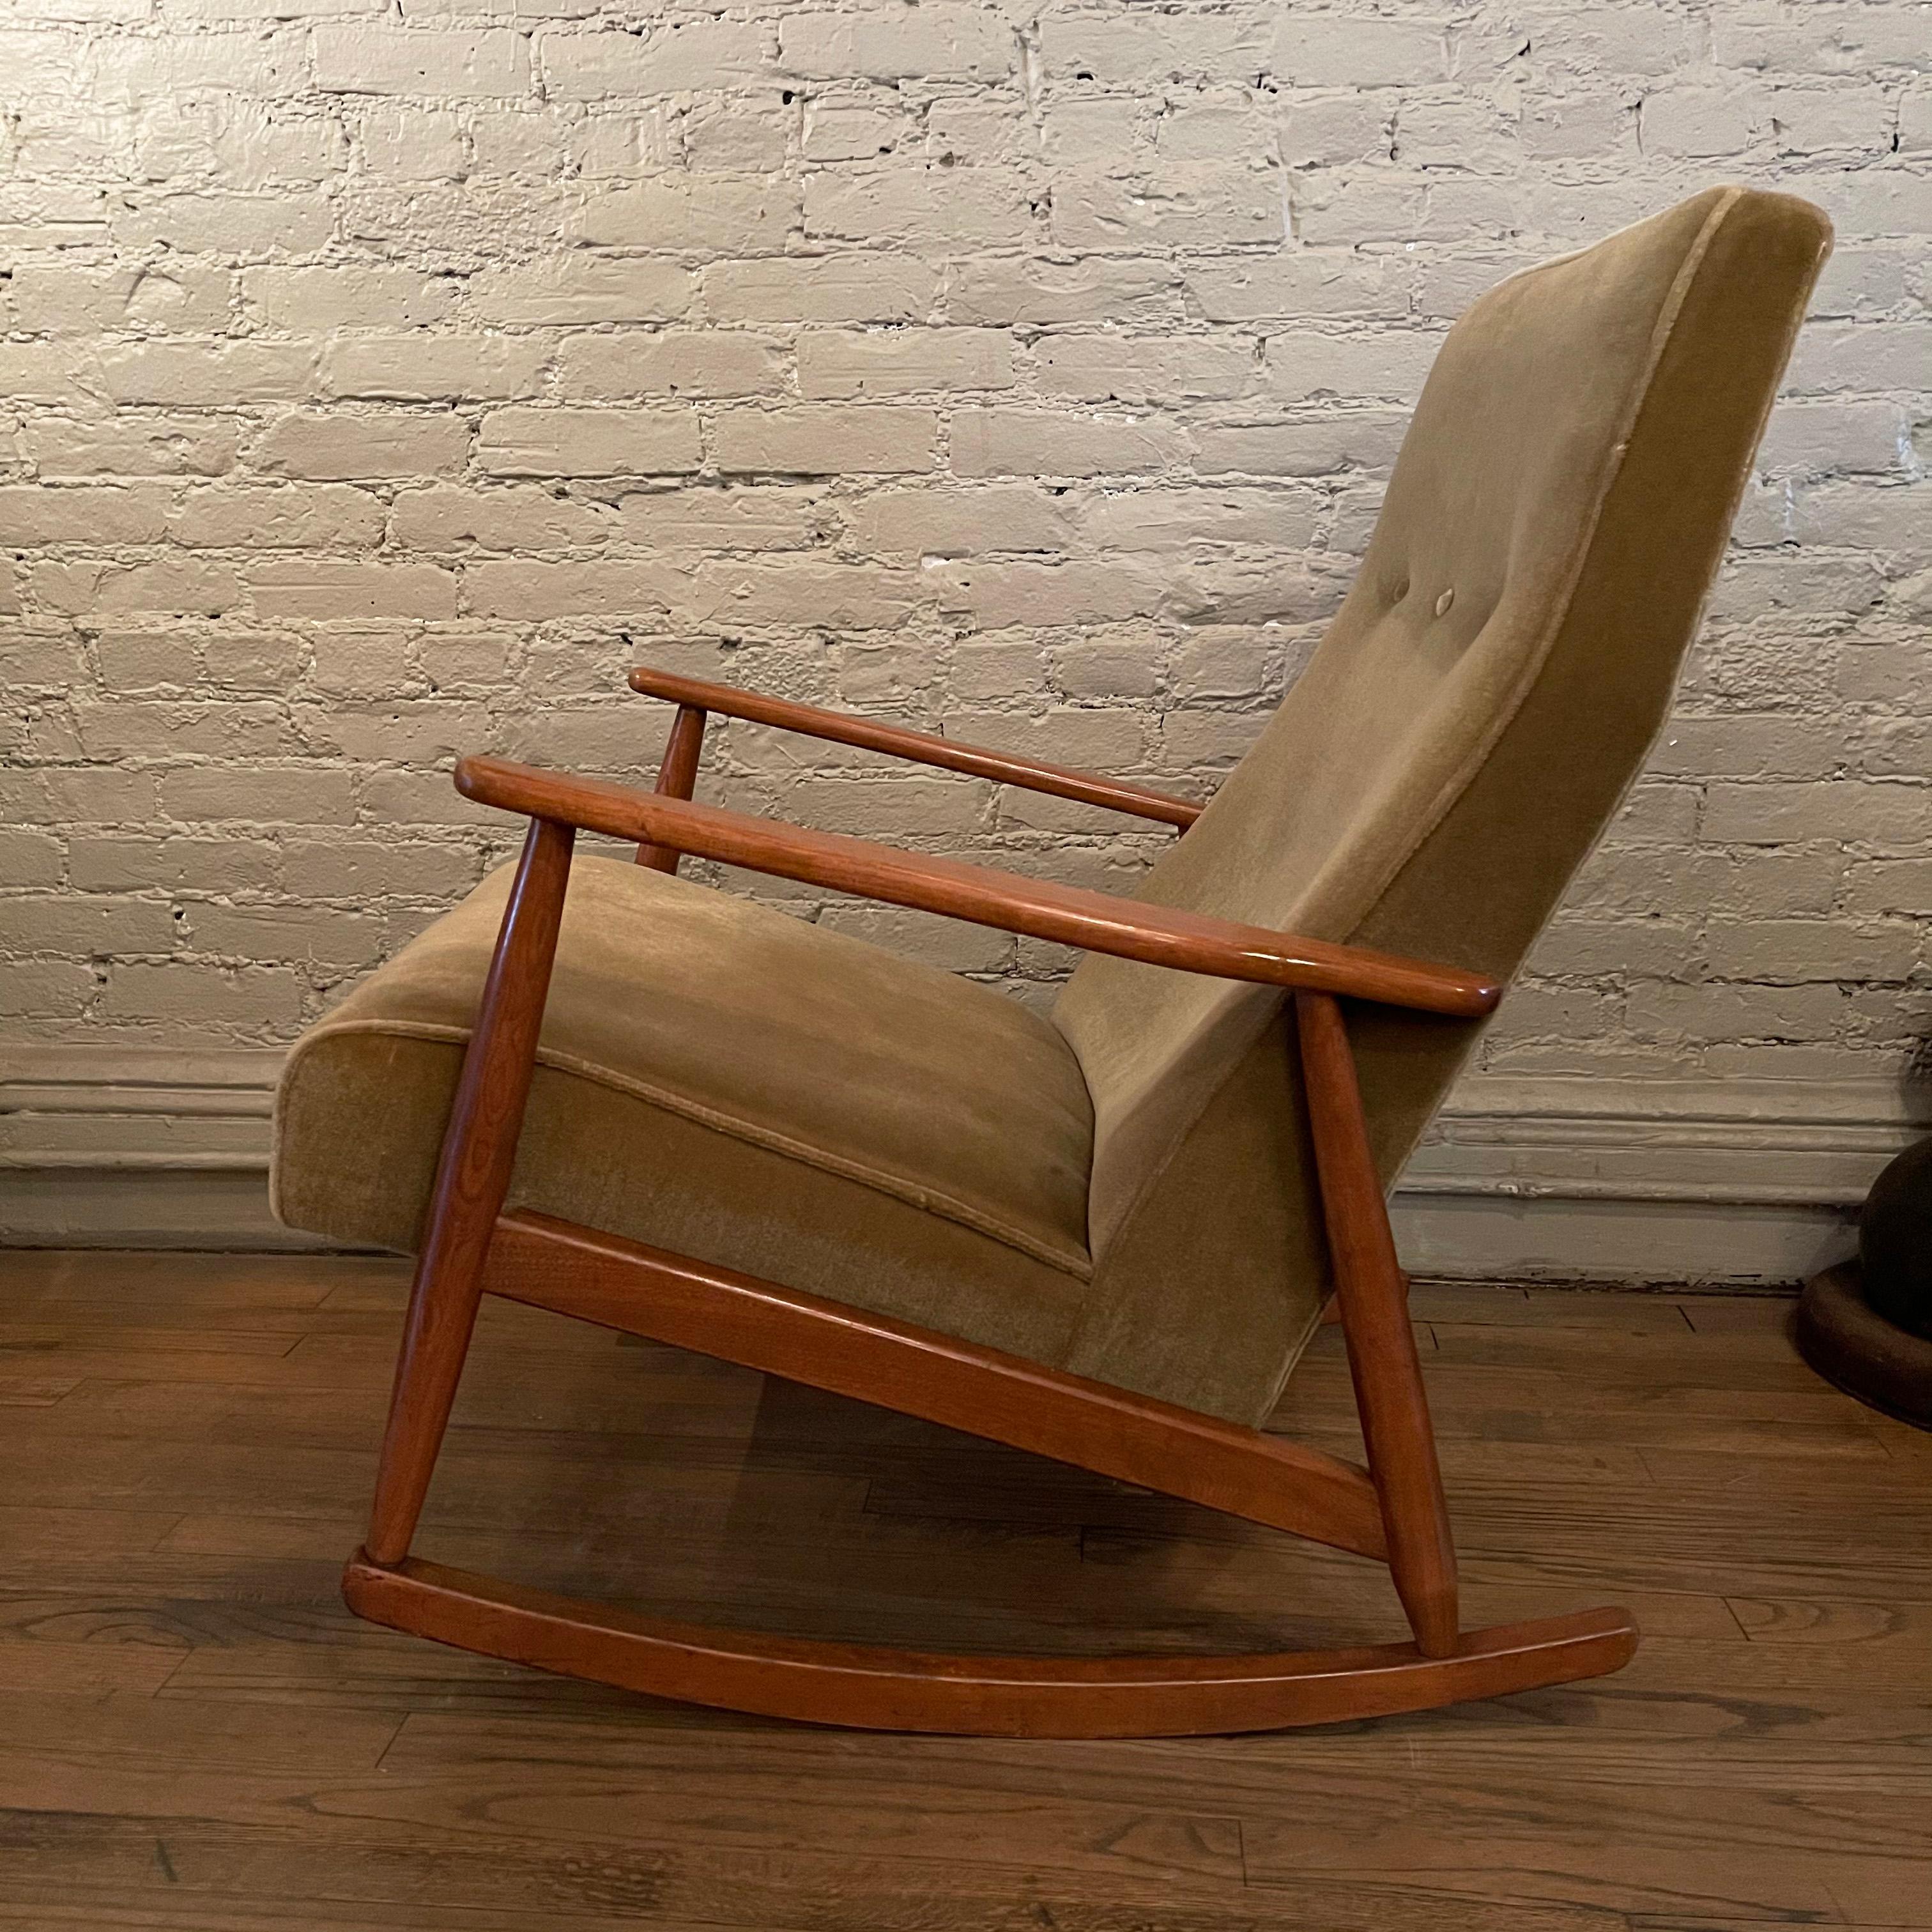 Comfortable and stylish, German, Mid-Century Modern, rocking chair features a highback, beech frame upholstered in a cozy, moss green mohair.